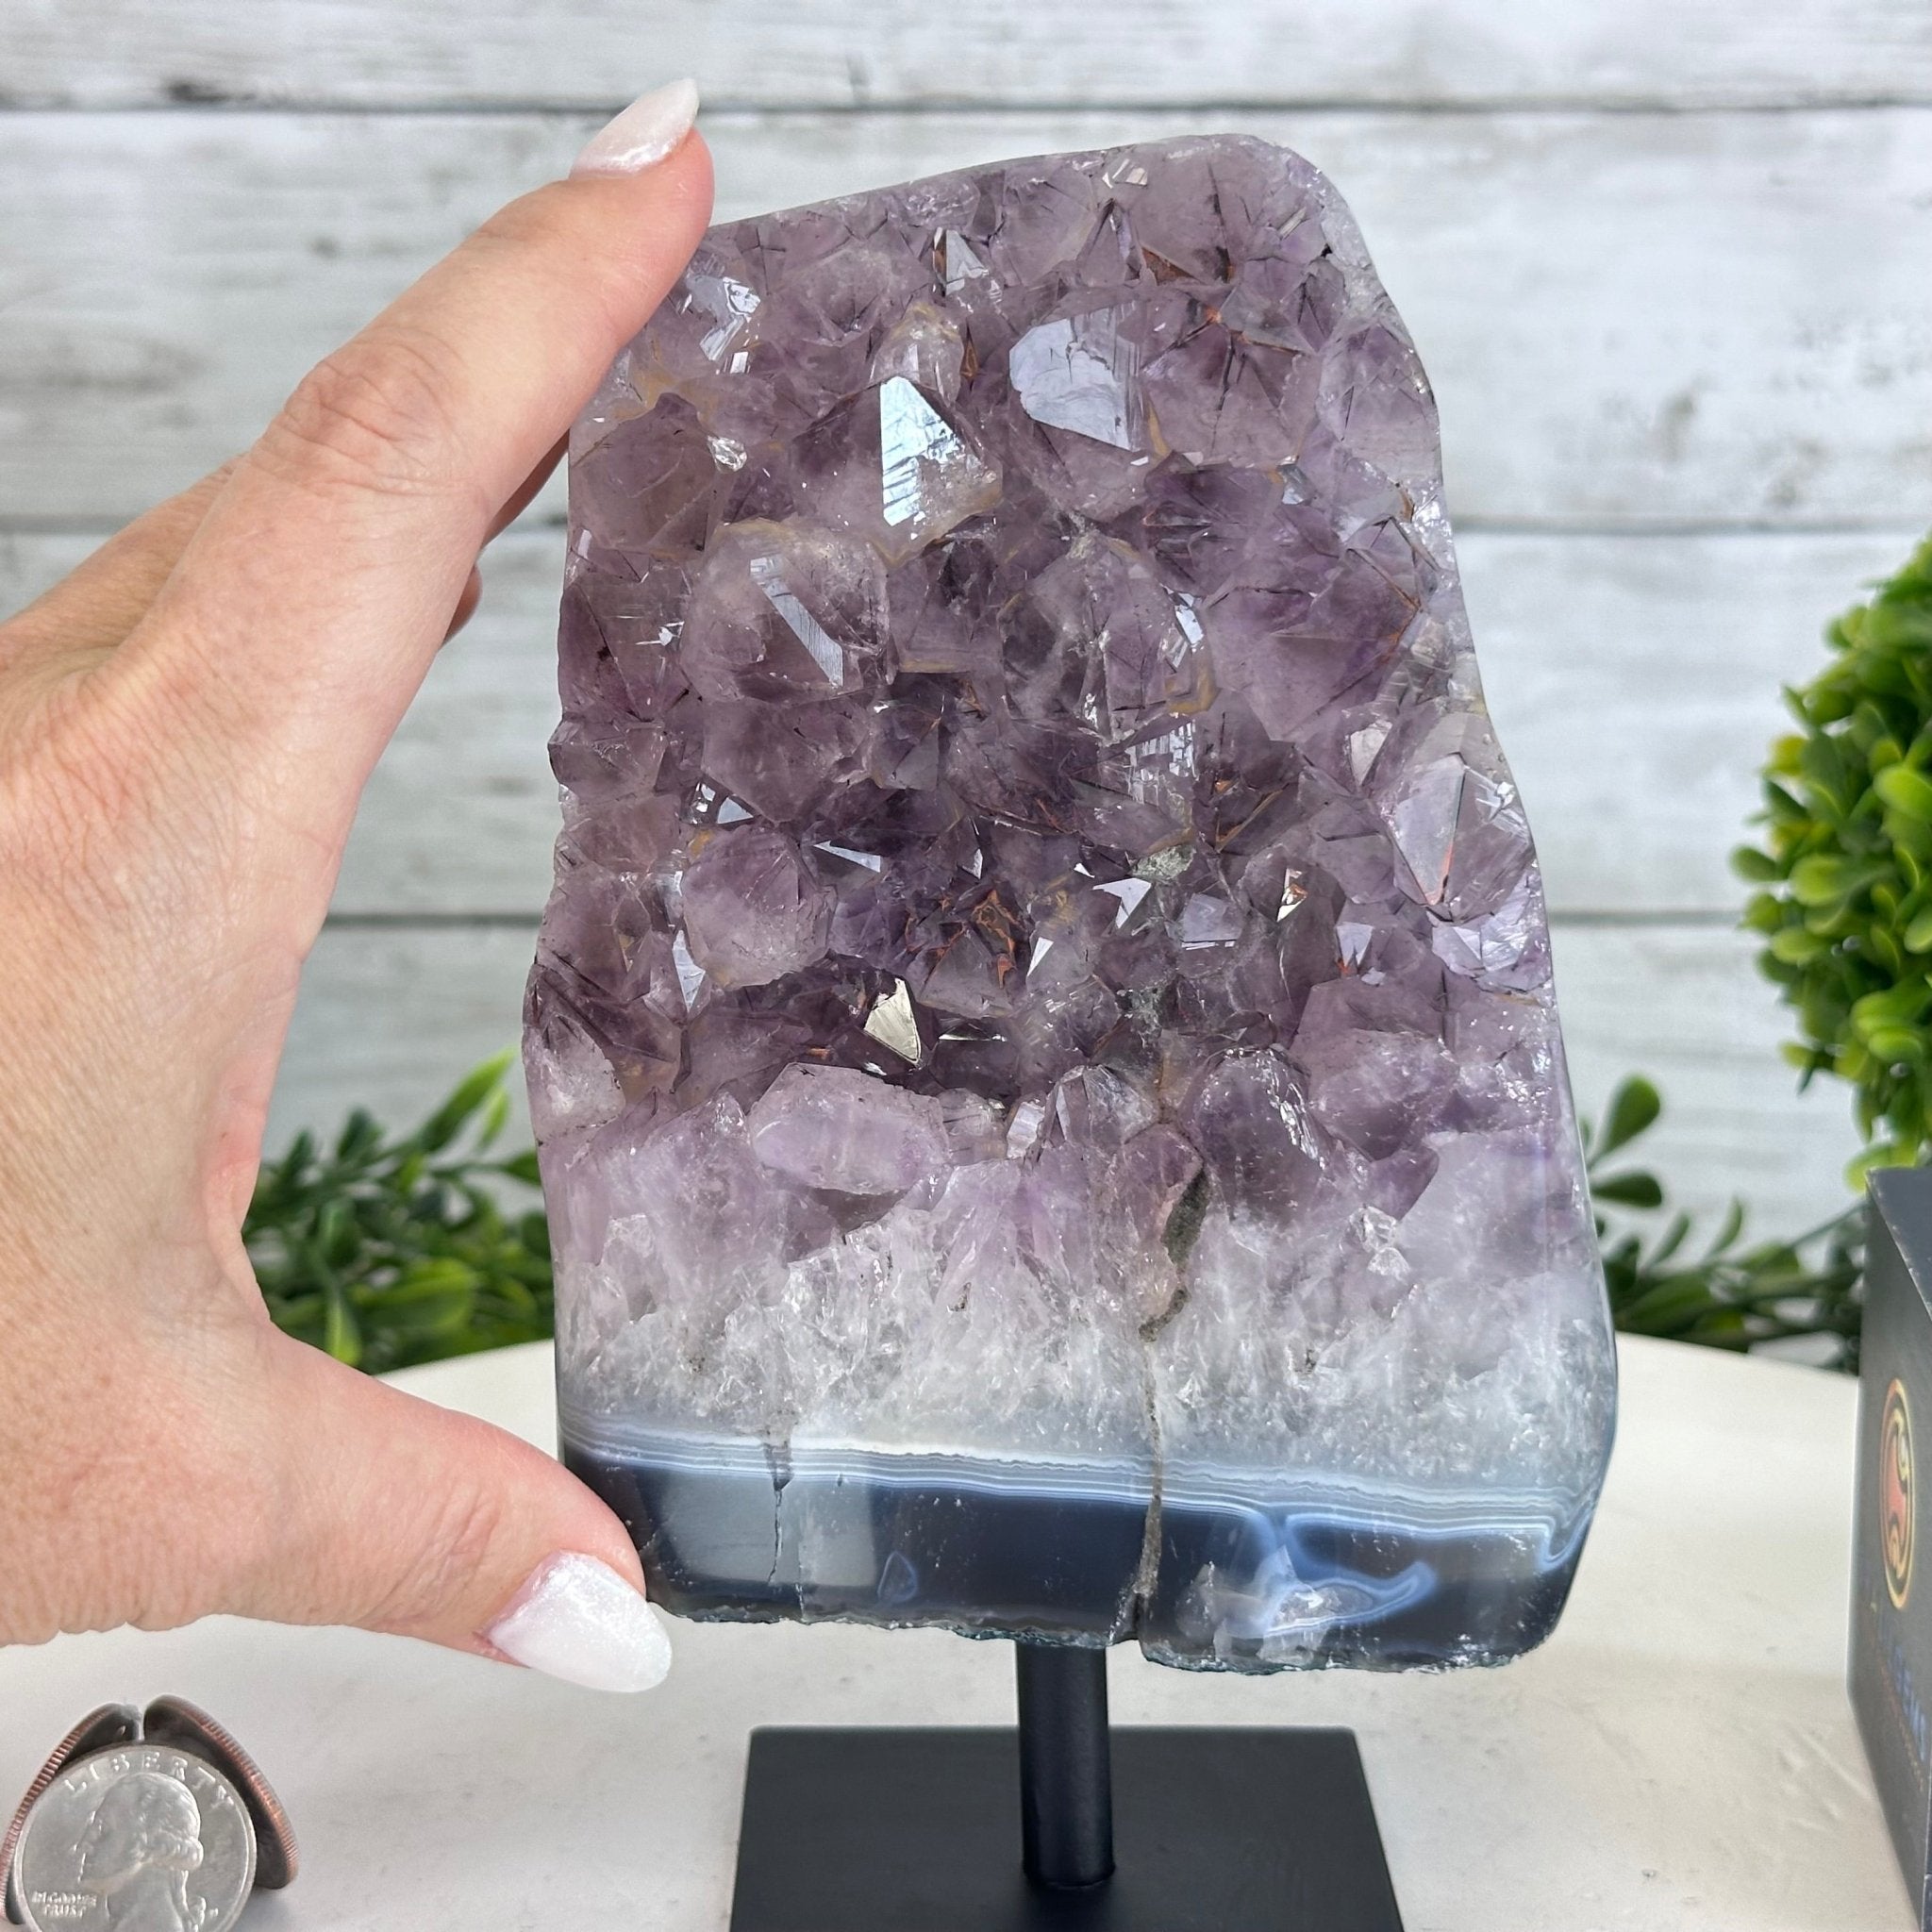 Amethyst Cluster on a Metal Base, 3.6 lbs & 7.4" Tall #5491-0172 - Brazil GemsBrazil GemsAmethyst Cluster on a Metal Base, 3.6 lbs & 7.4" Tall #5491-0172Clusters on Fixed Bases5491-0172